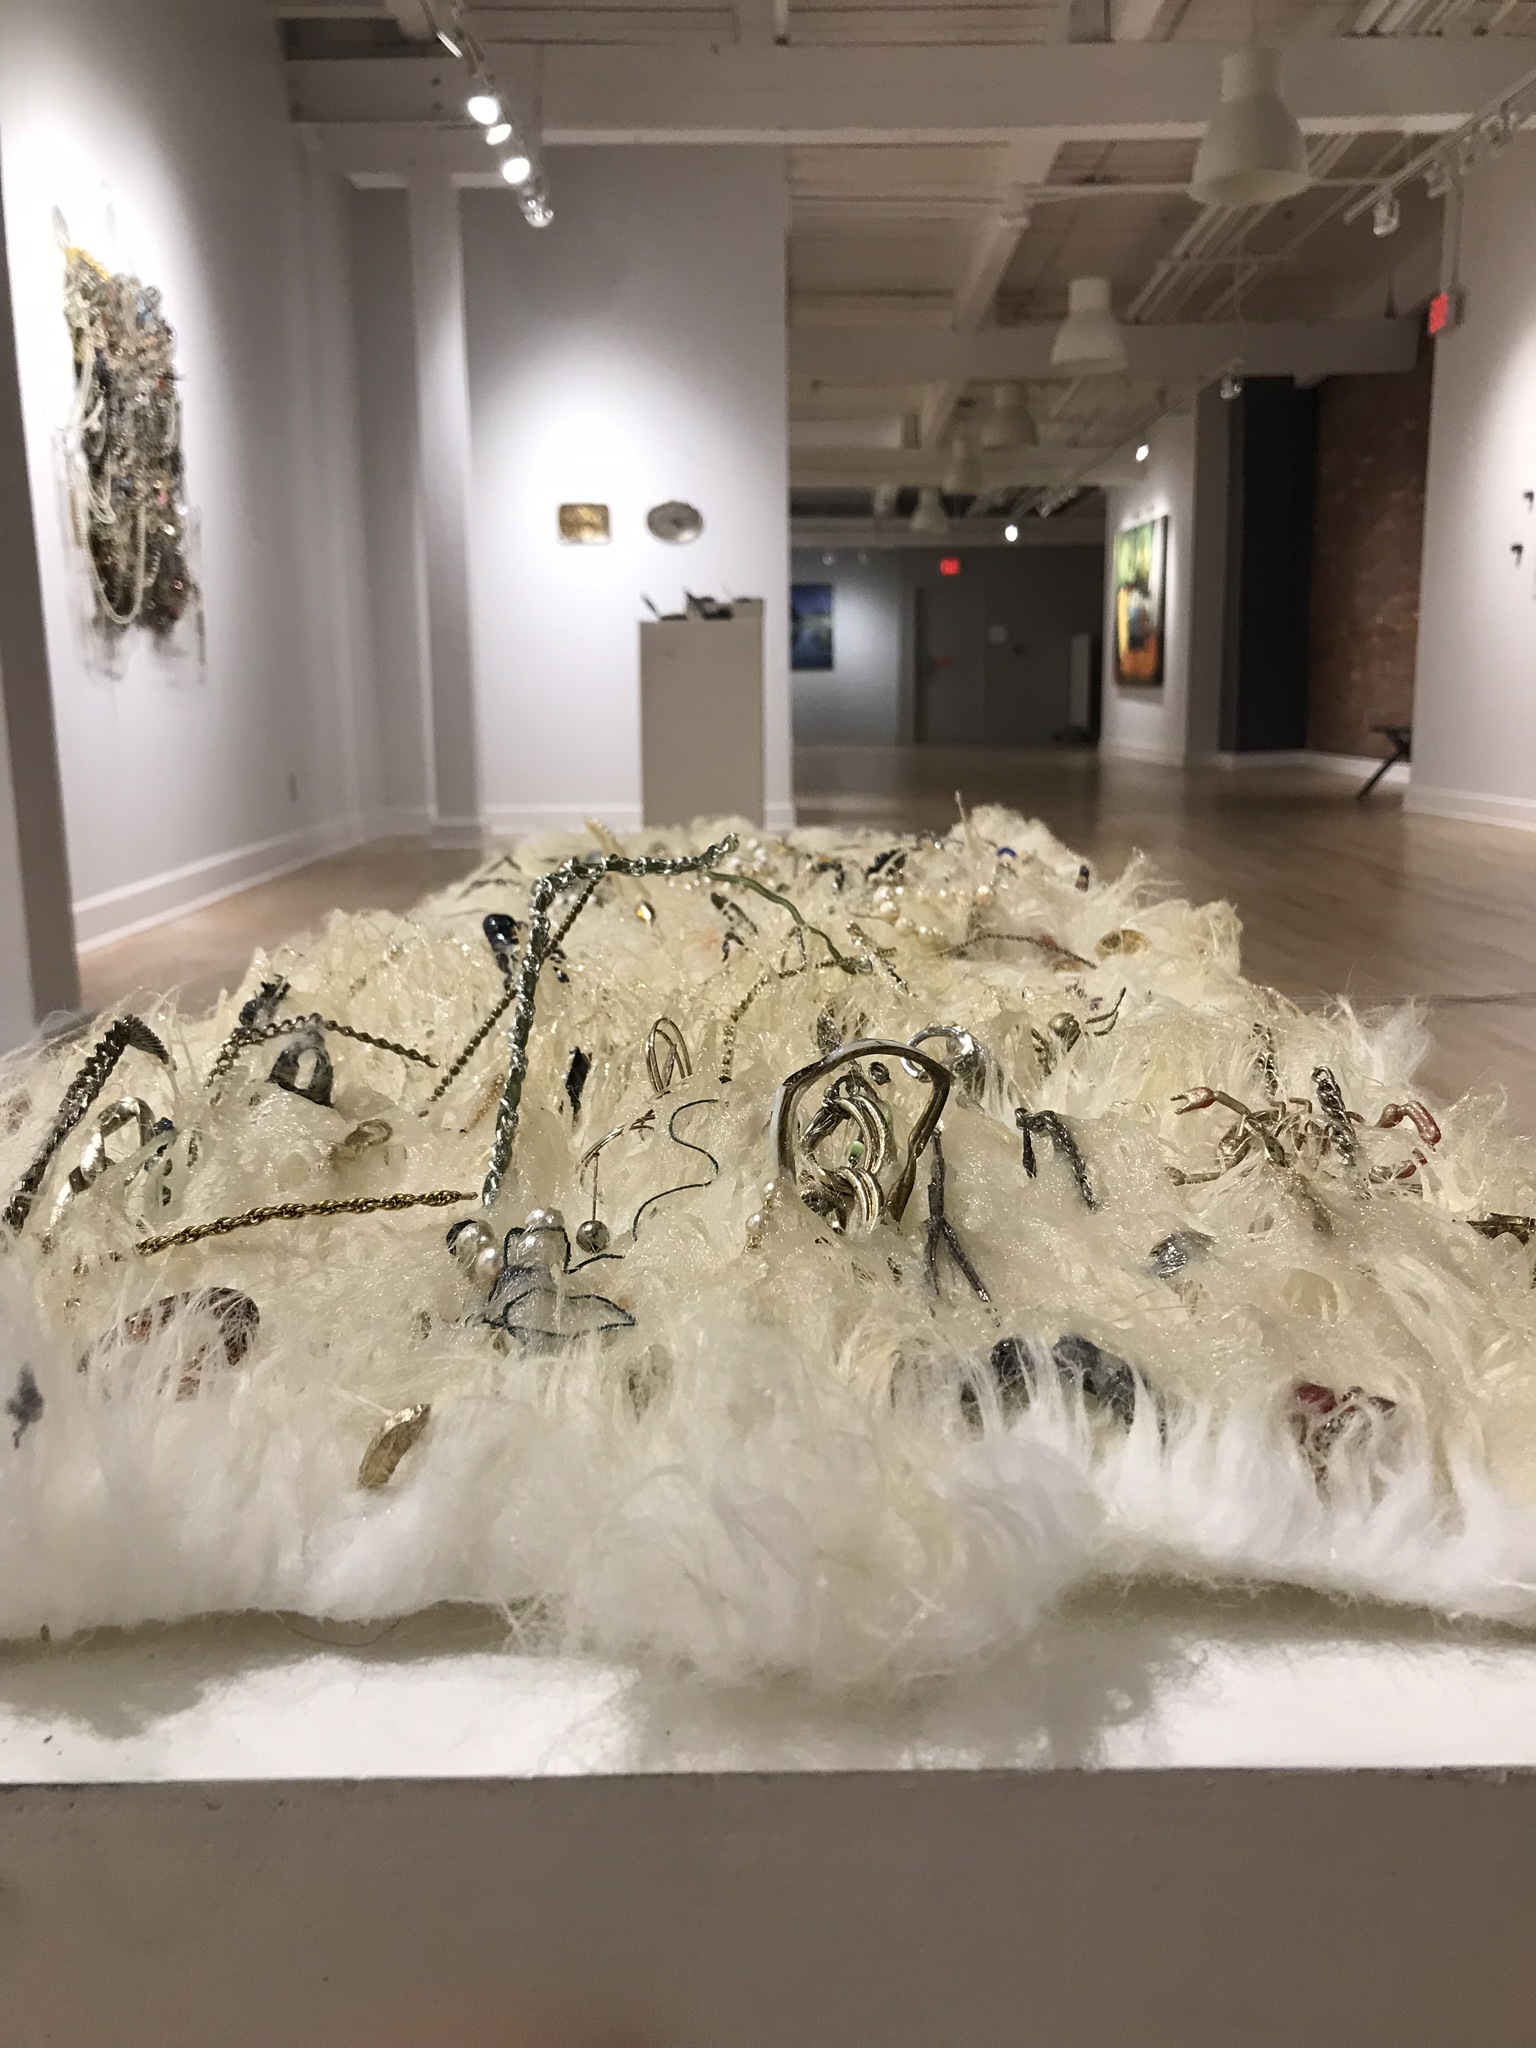   Faux Fur,  2019, costume jewelry, chains, found objects, and resin on faux fur, 16x48” 